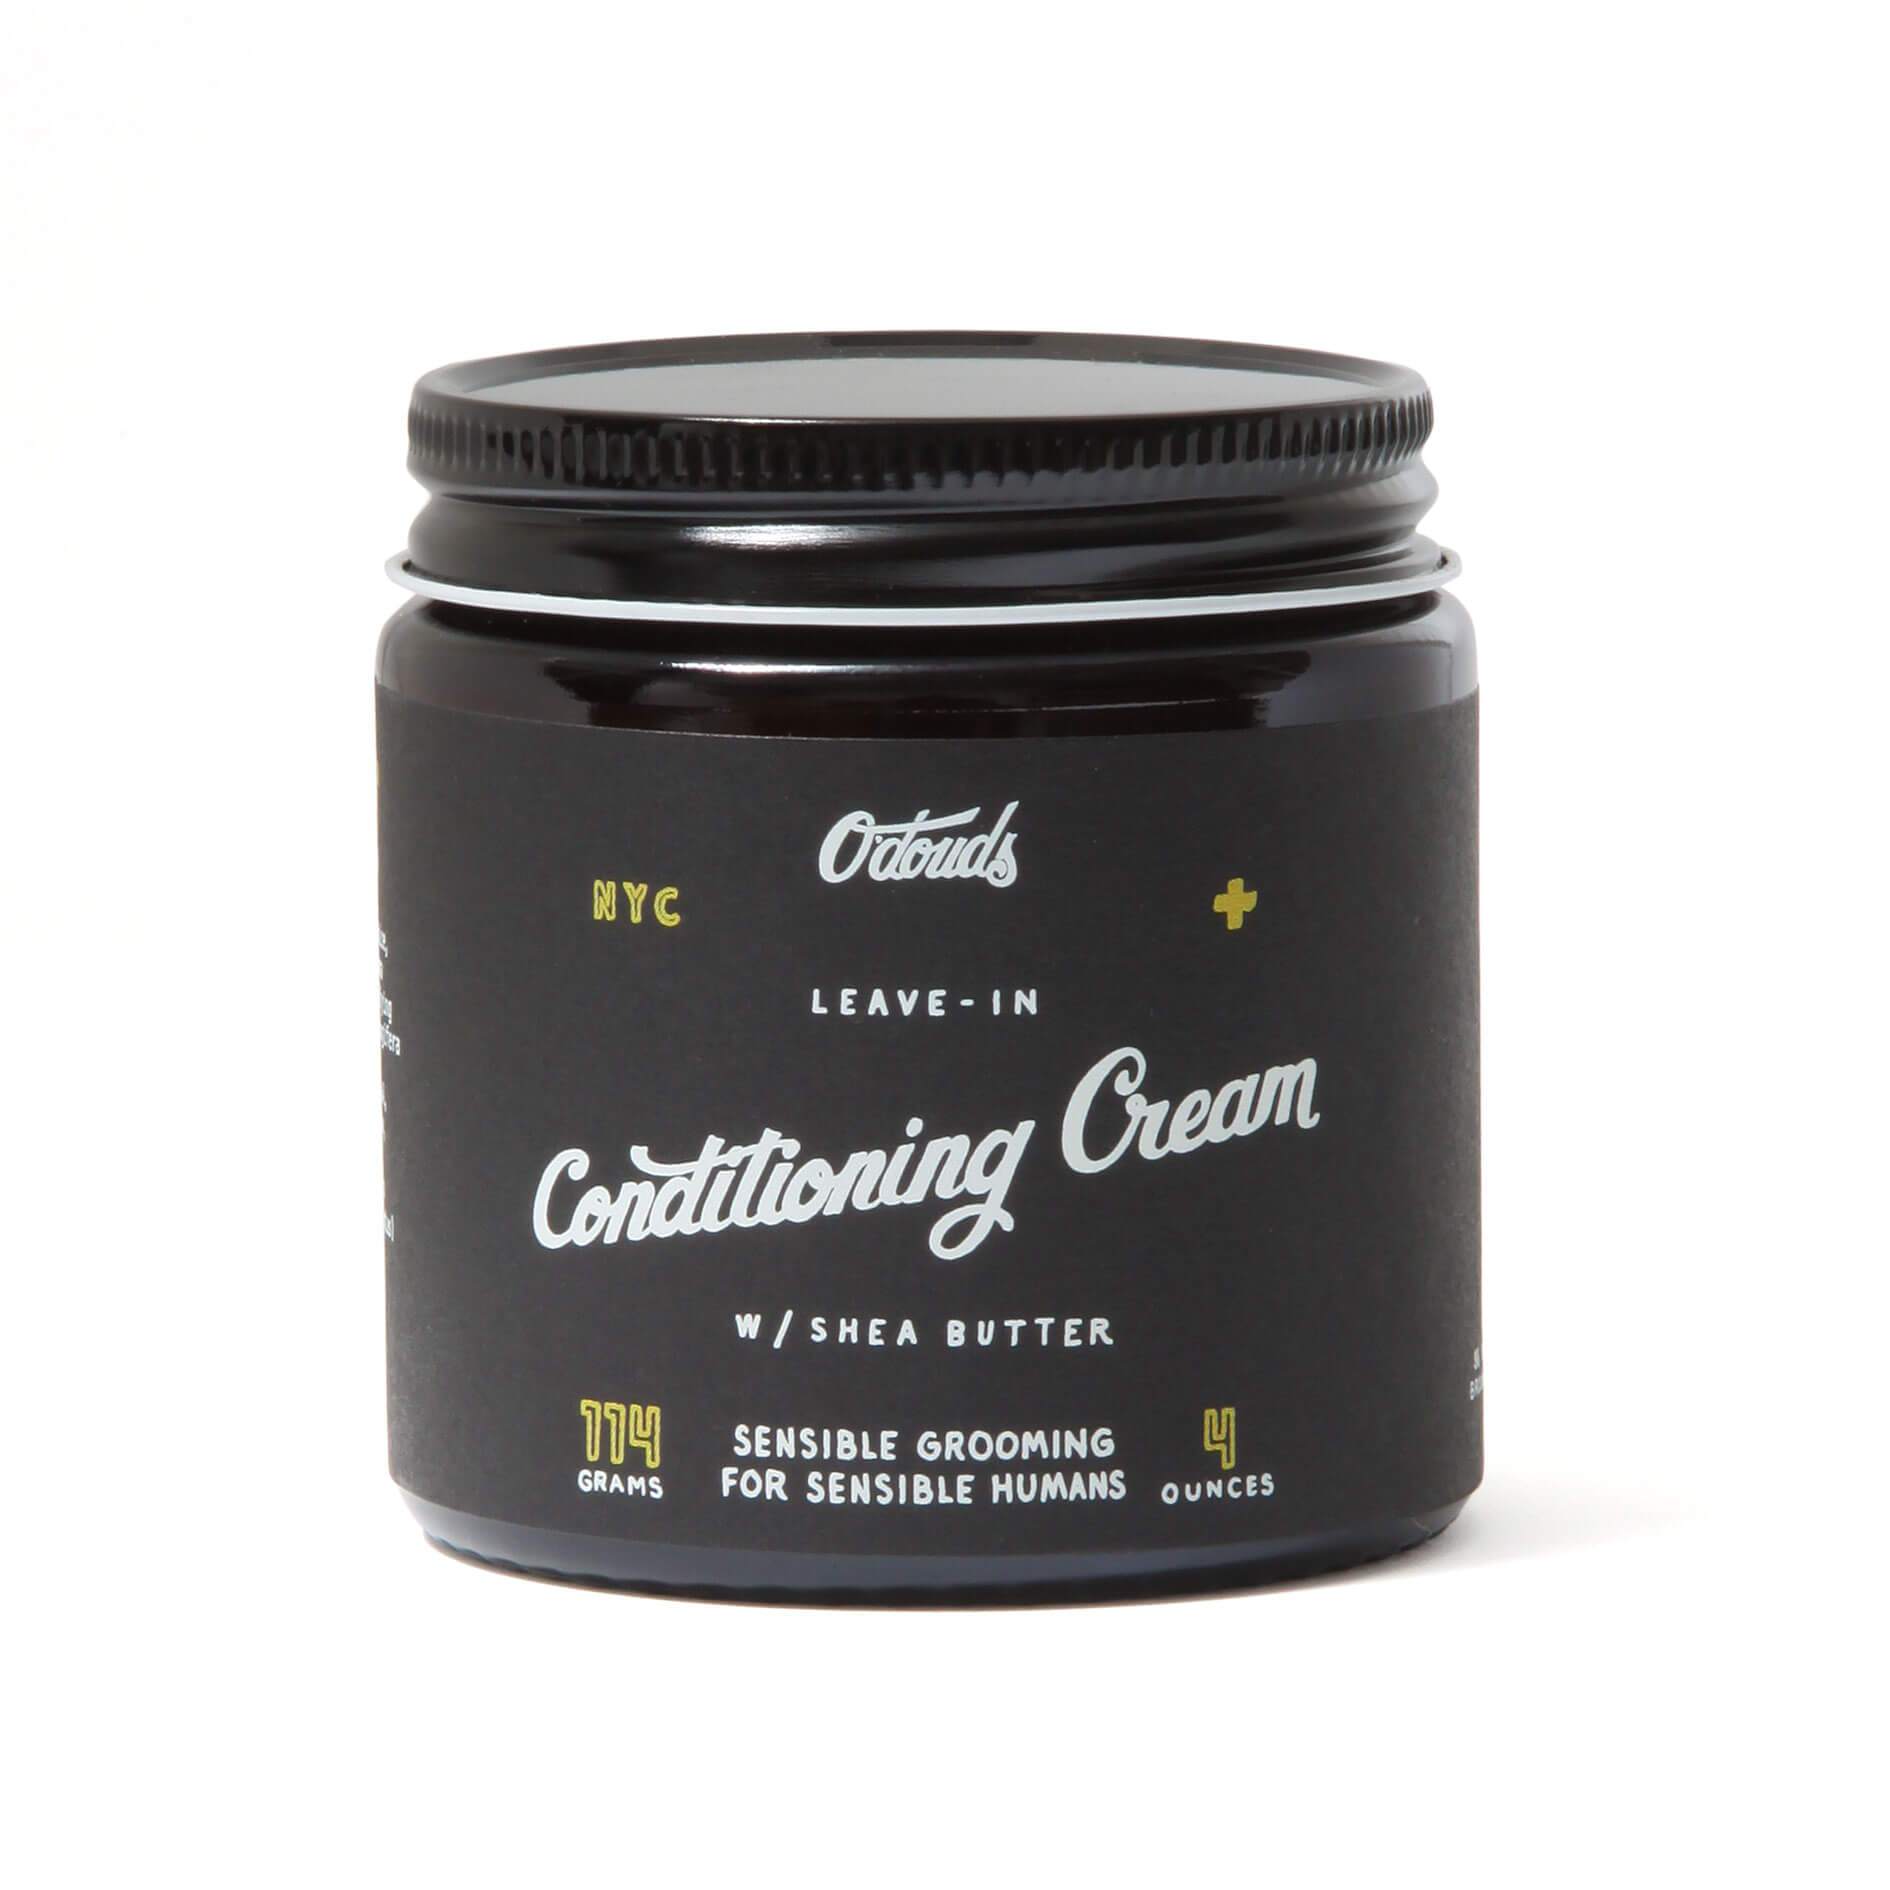 O'Douds Conditioning Cream